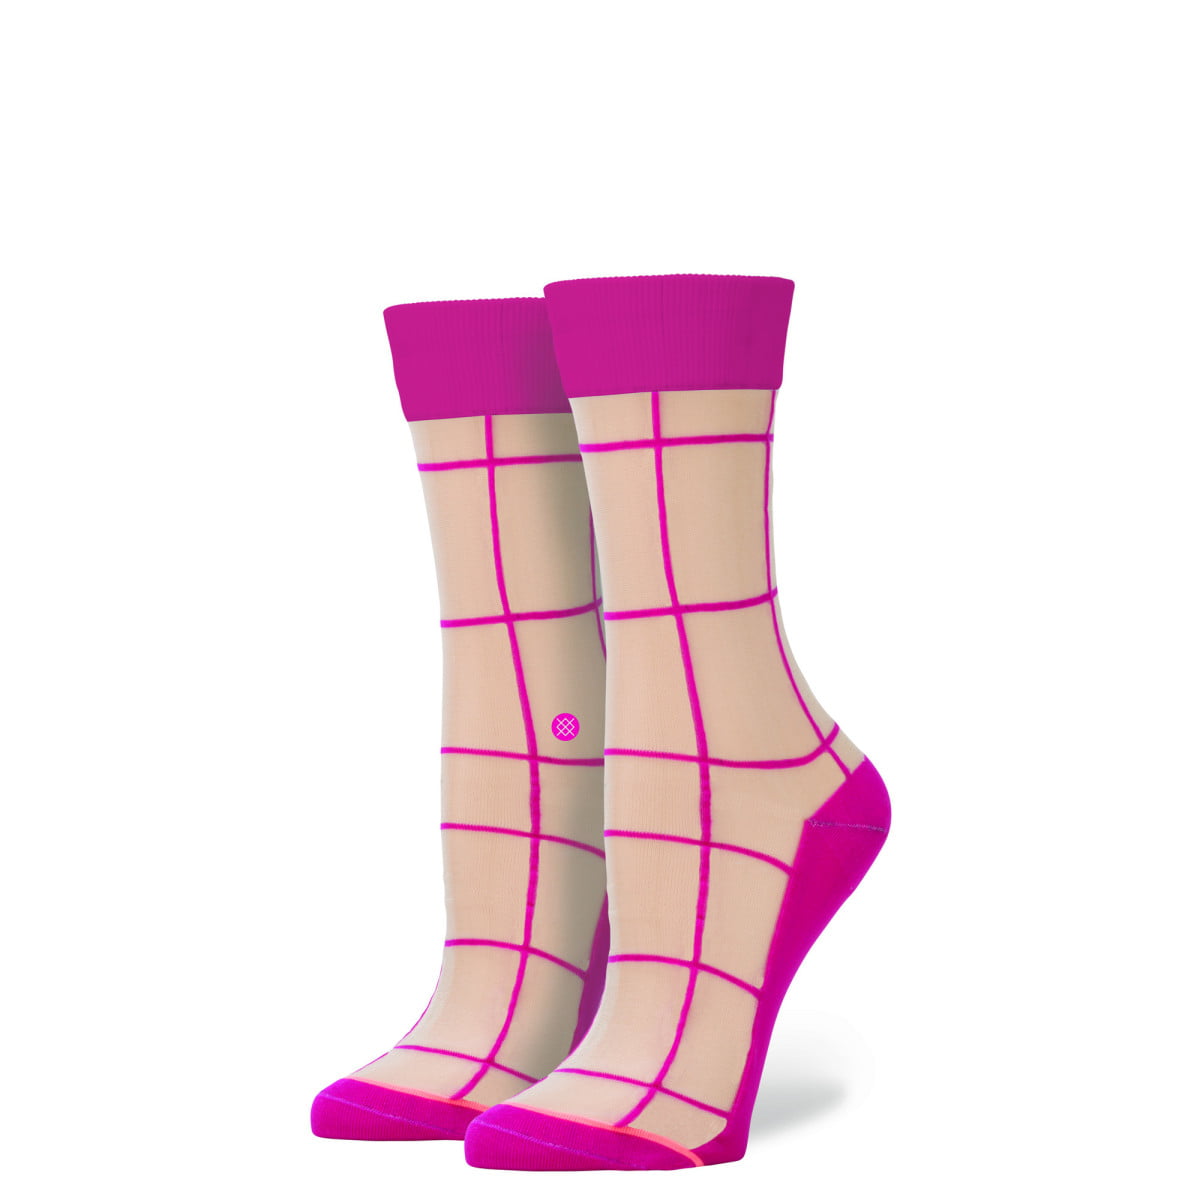 Stance for Women: Retro Pink Pink